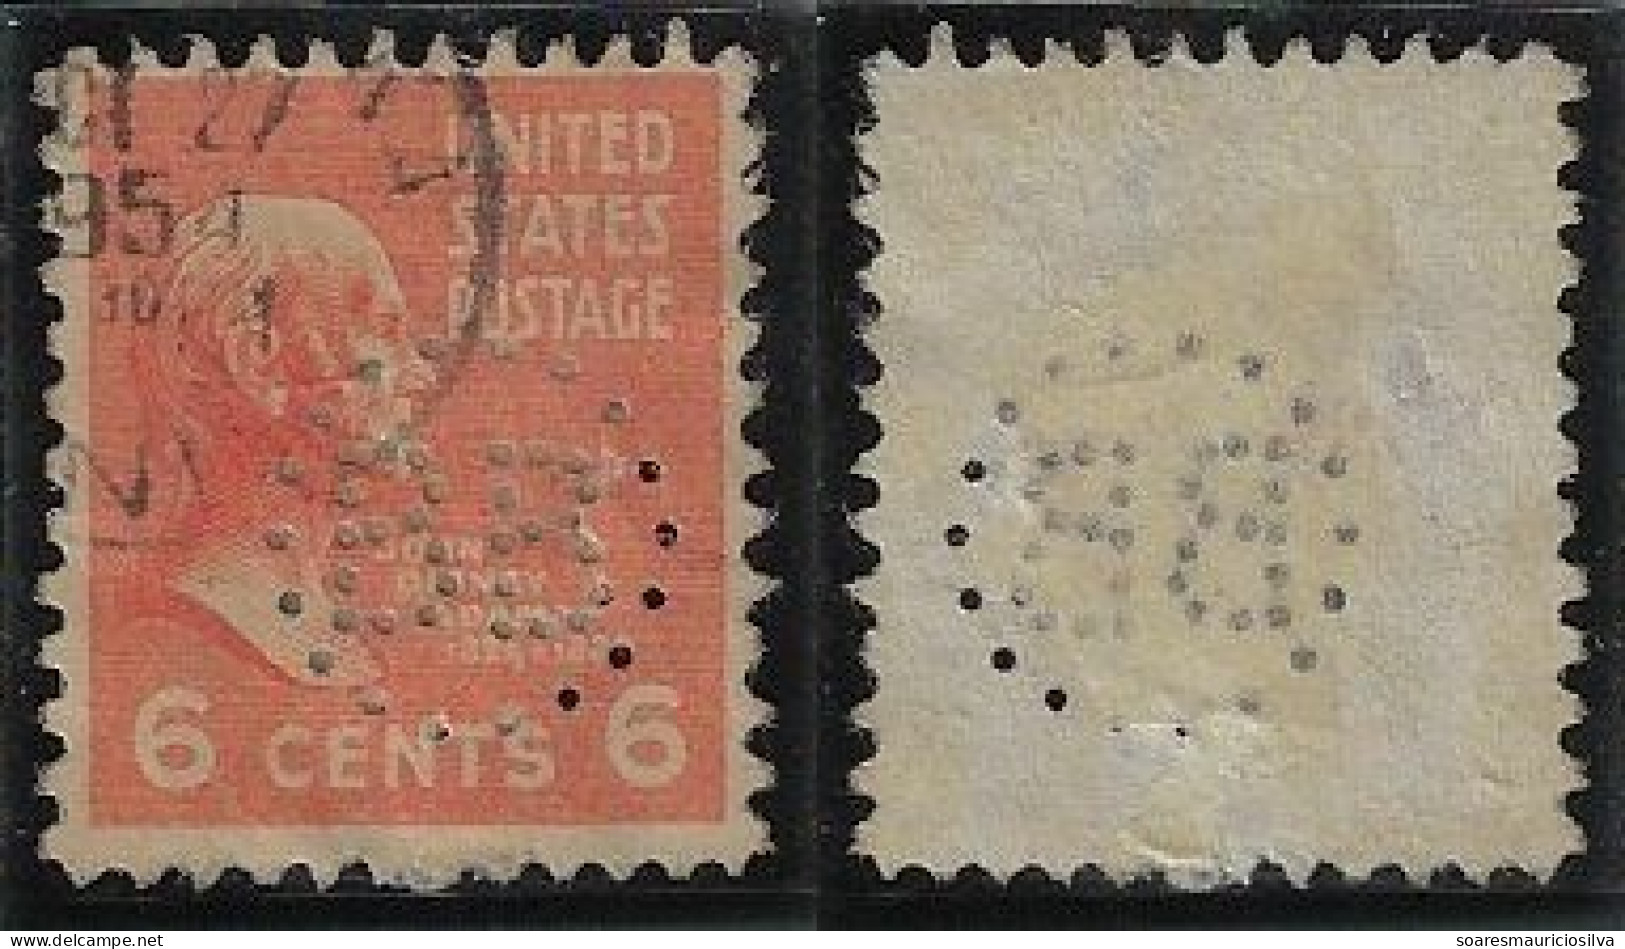 USA United States 1902/1954 Stamp With Perfin BB(Circle) By United States Rubber Company From Mishawaka Lochung Perfore - Perforés